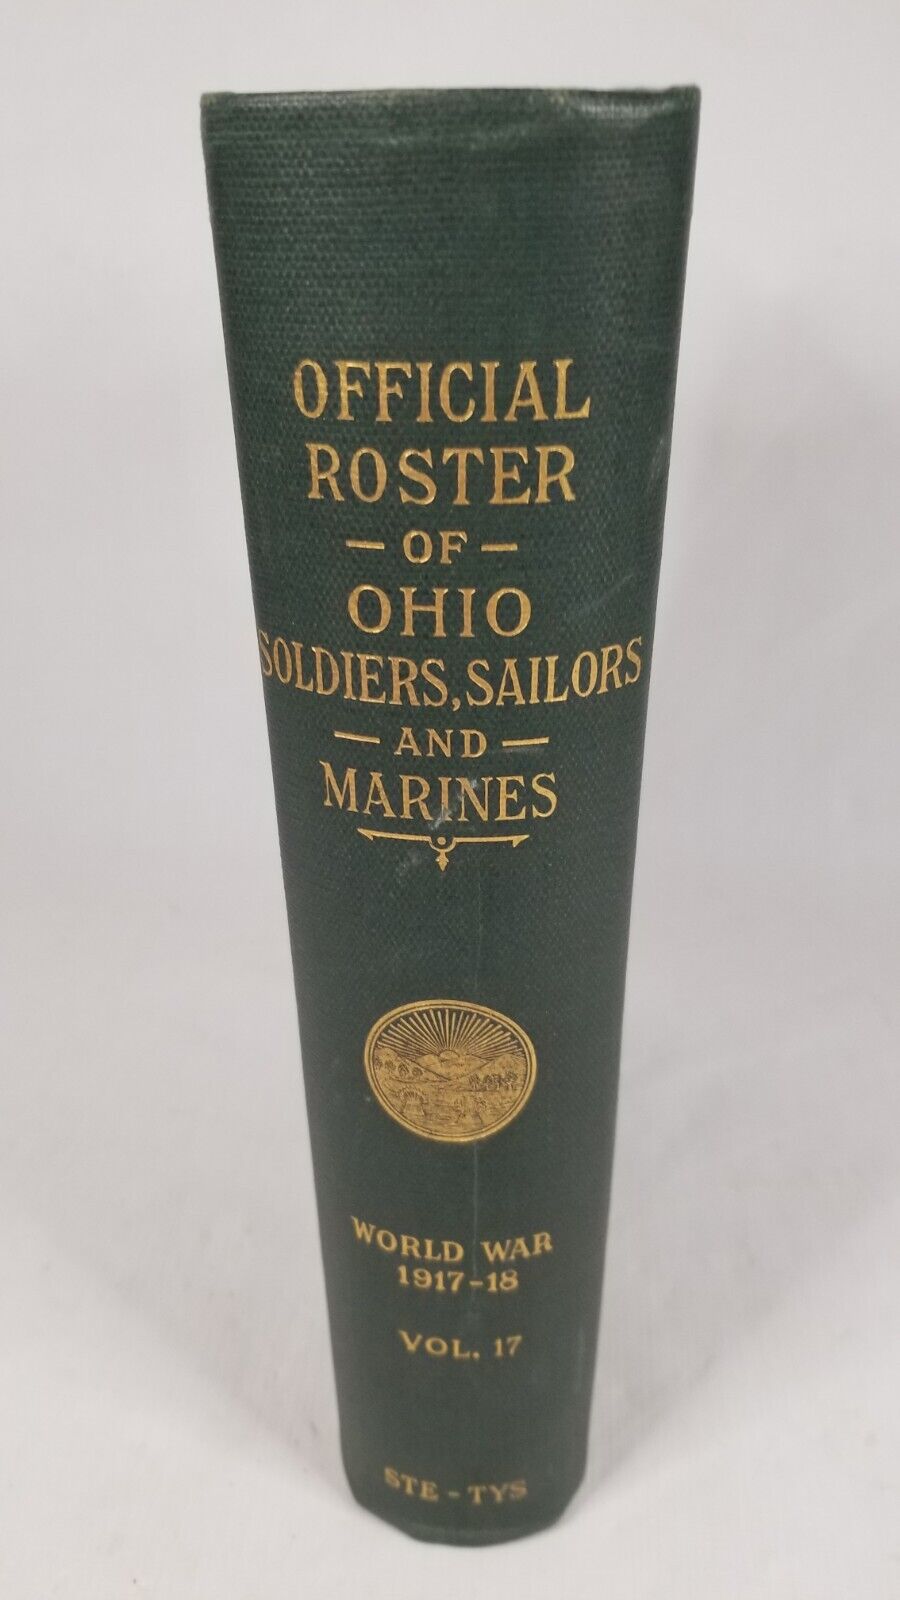 1926 Official Roster of Ohio Soldiers Sailors Marines World War 1917-1918 Vol 17